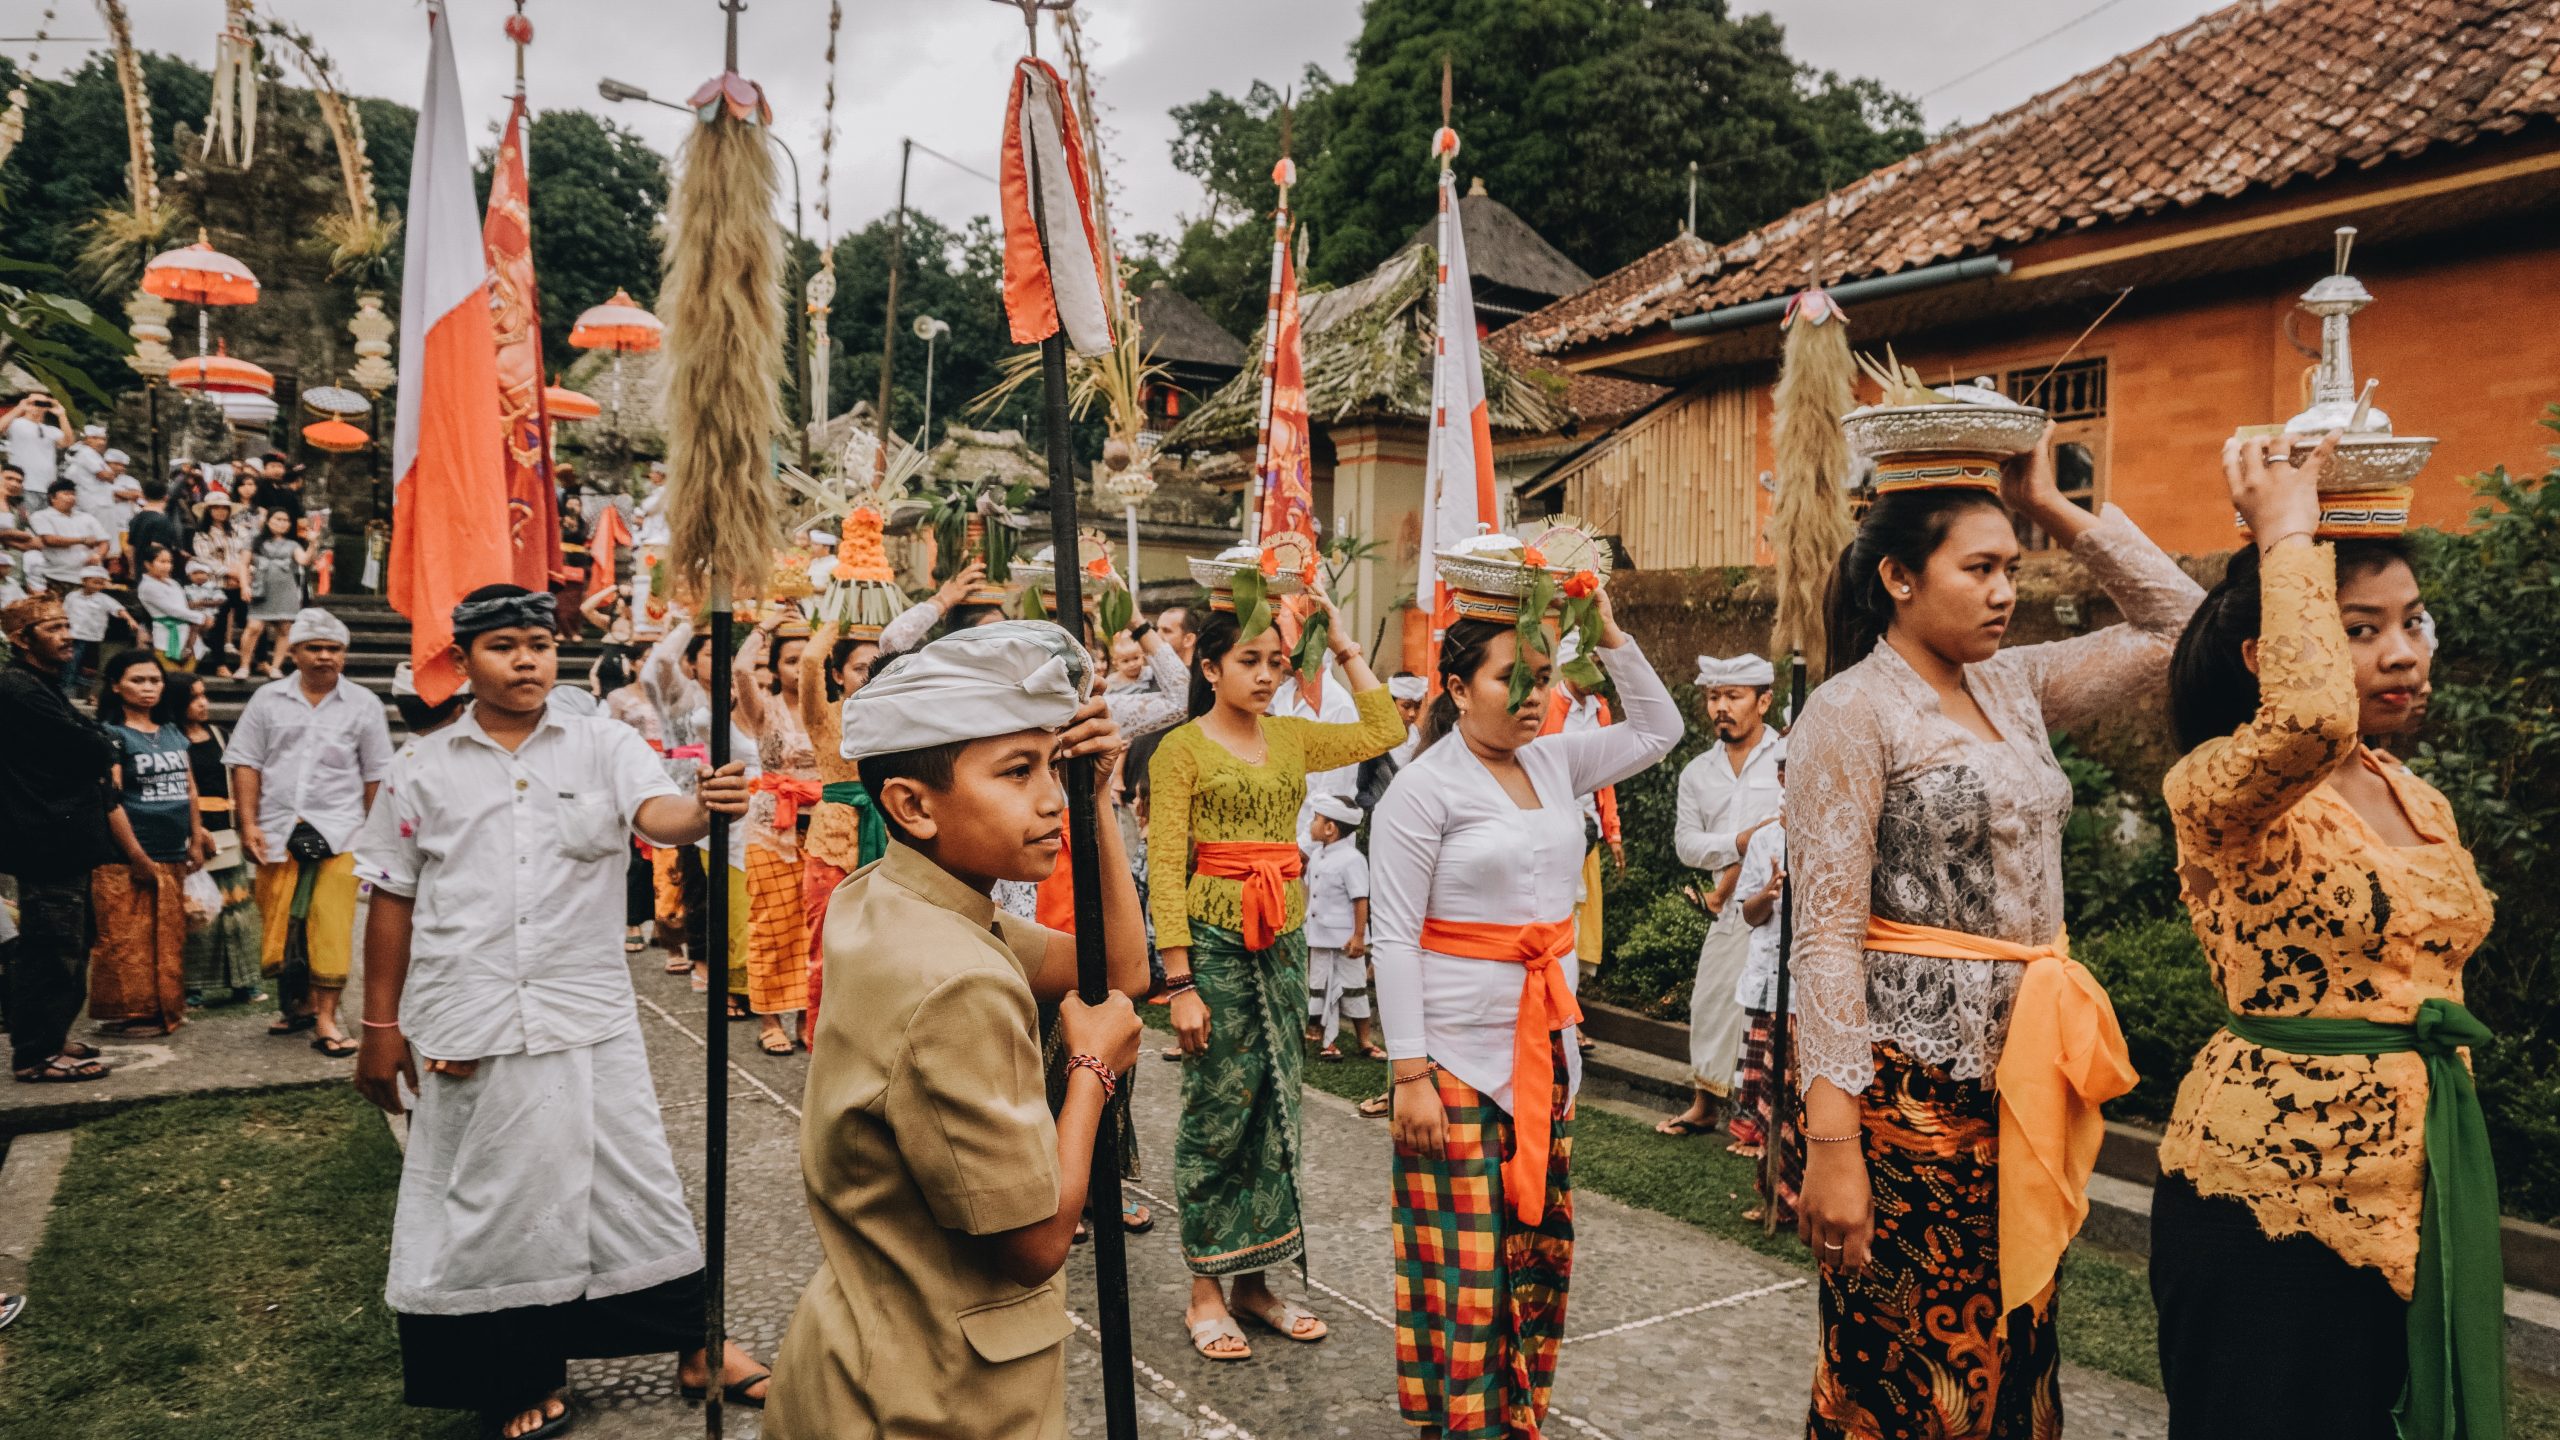 Balinese people dressed in sarong